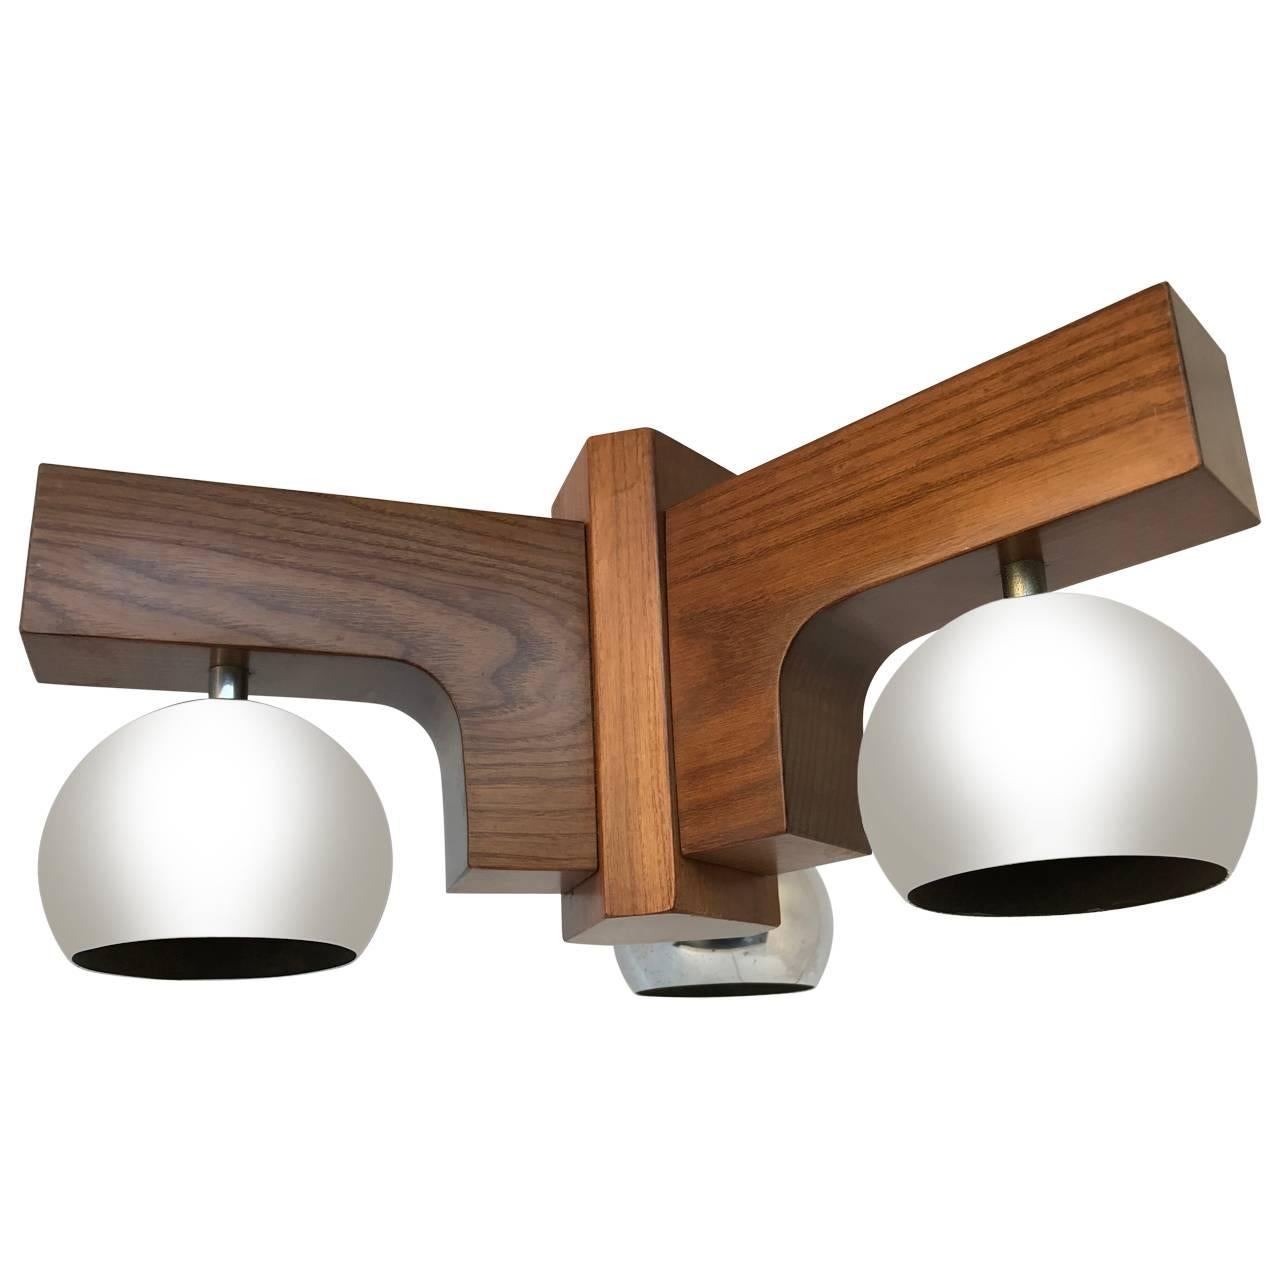 Mid-Century Modern Italian ceiling fixture chandelier wood and brushed chrome globes.
Small Italian three-globe light fixture. The wooden frame with brushed chrome globes is an excellent choice for a modern decor. The chandelier will emit a warm